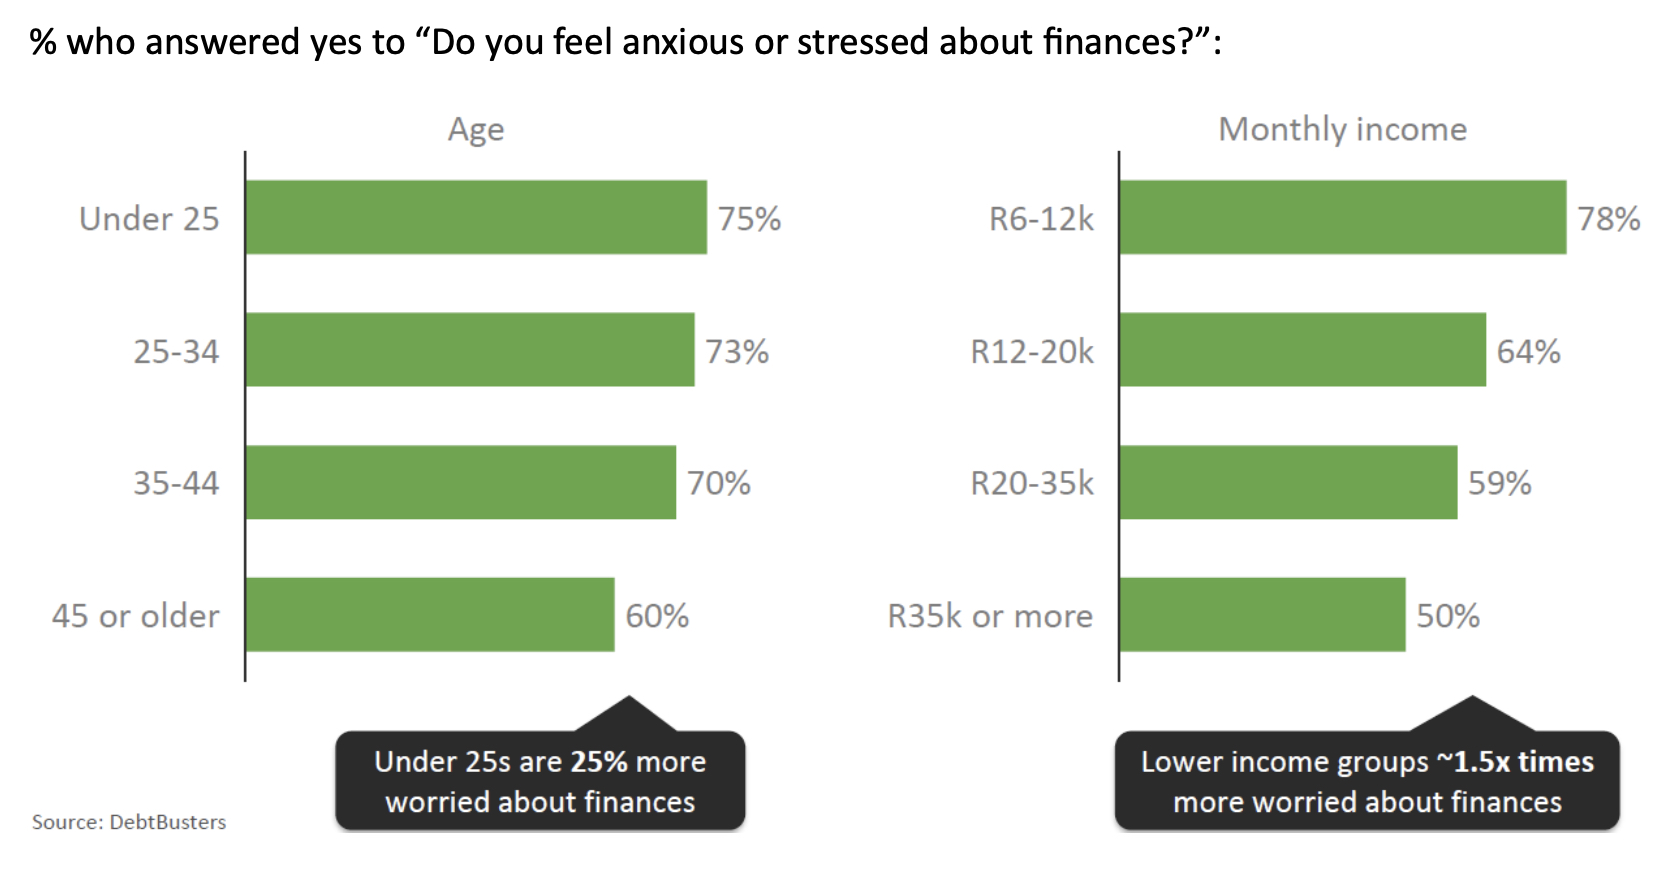 Graph showing % who answered yes to "Do you feel anxious or stressed about finances?"